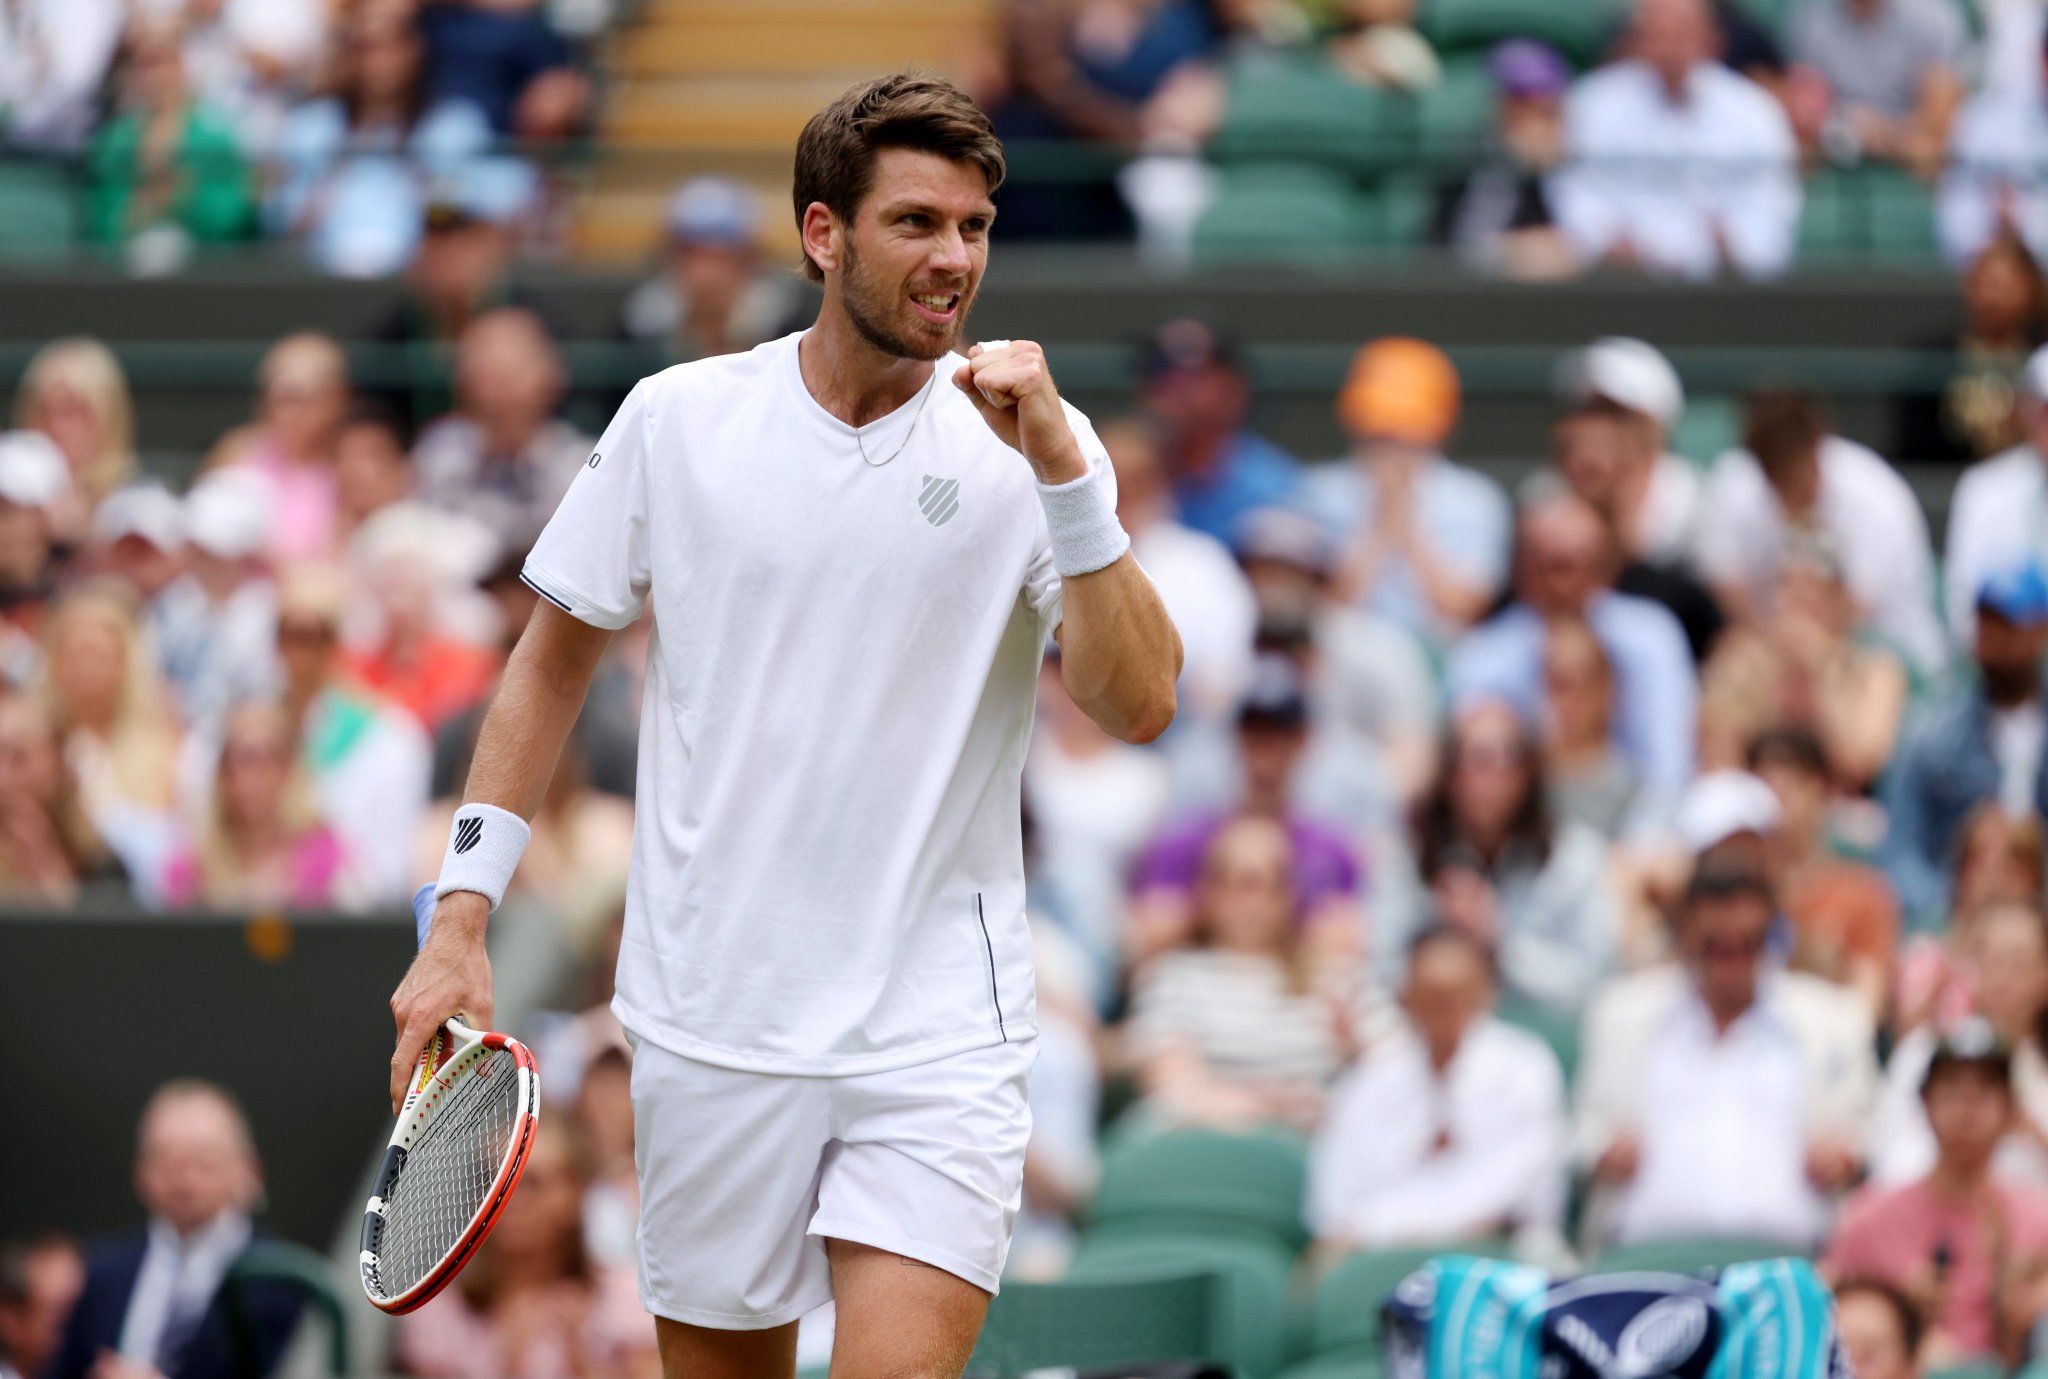 Wimbledon 2022 Match Result: Cameron Norrie vs Tommy Paul: Norrie wins (6-4, 7-5, 6-4)